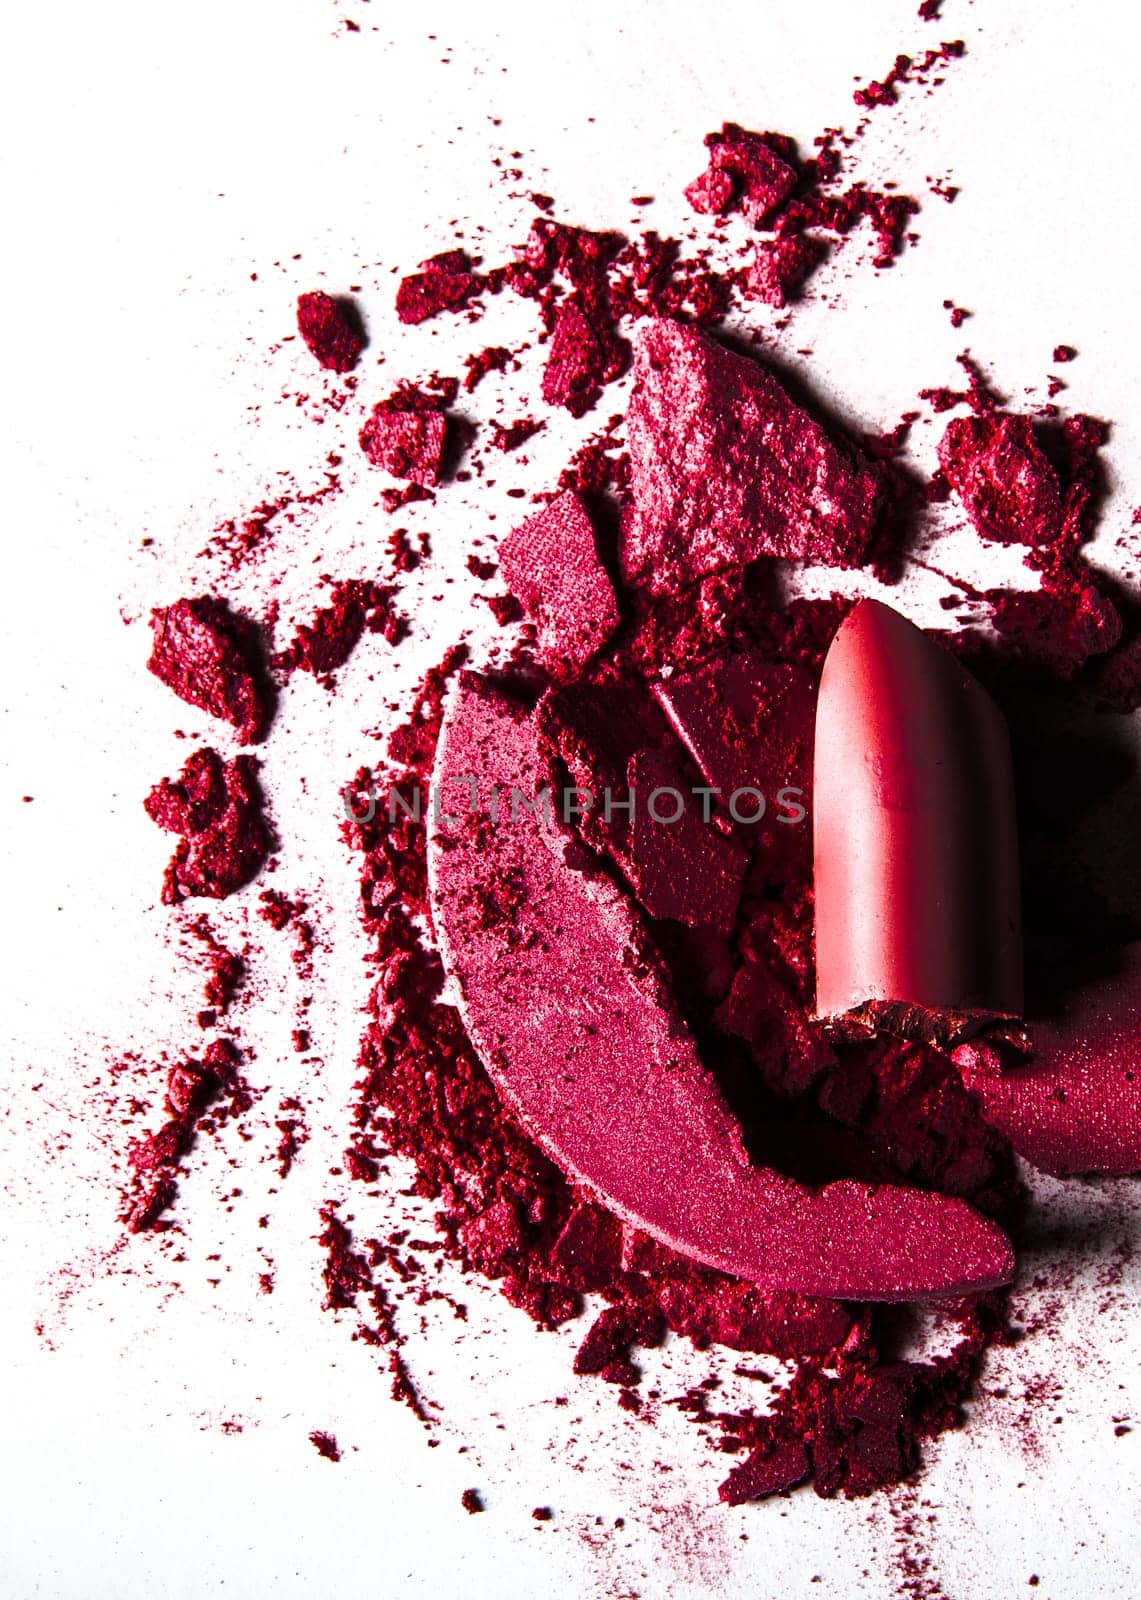 crushed make-up products - beauty and cosmetics styled concept, elegant visuals